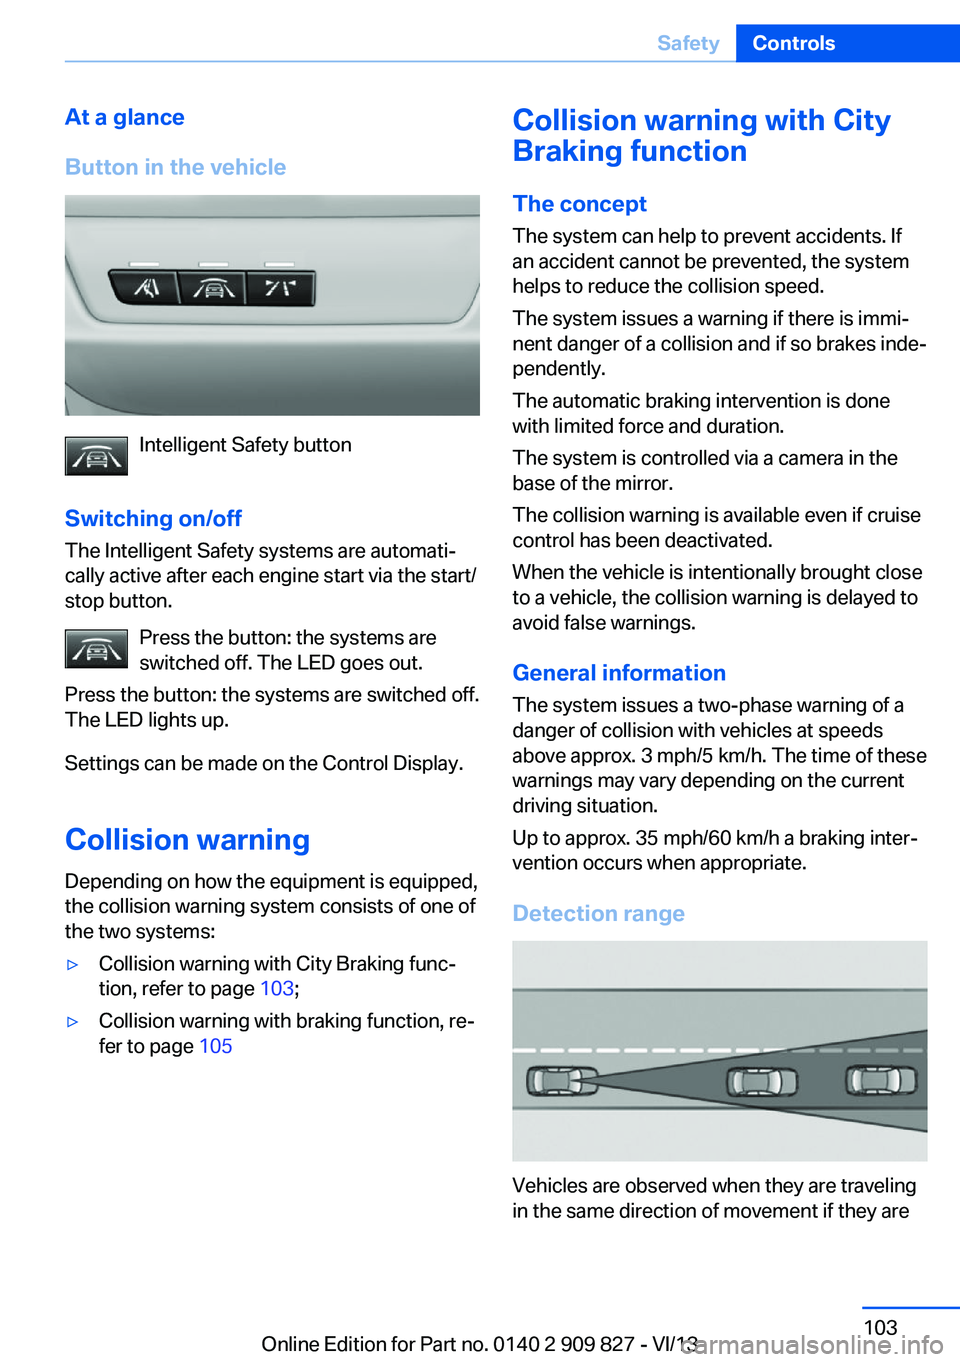 BMW 435I COUPE 2014  Owners Manual At a glance
Button in the vehicle
Intelligent Safety button
Switching on/off The Intelligent Safety systems are automati‐
cally active after each engine start via the start/
stop button.
Press the b